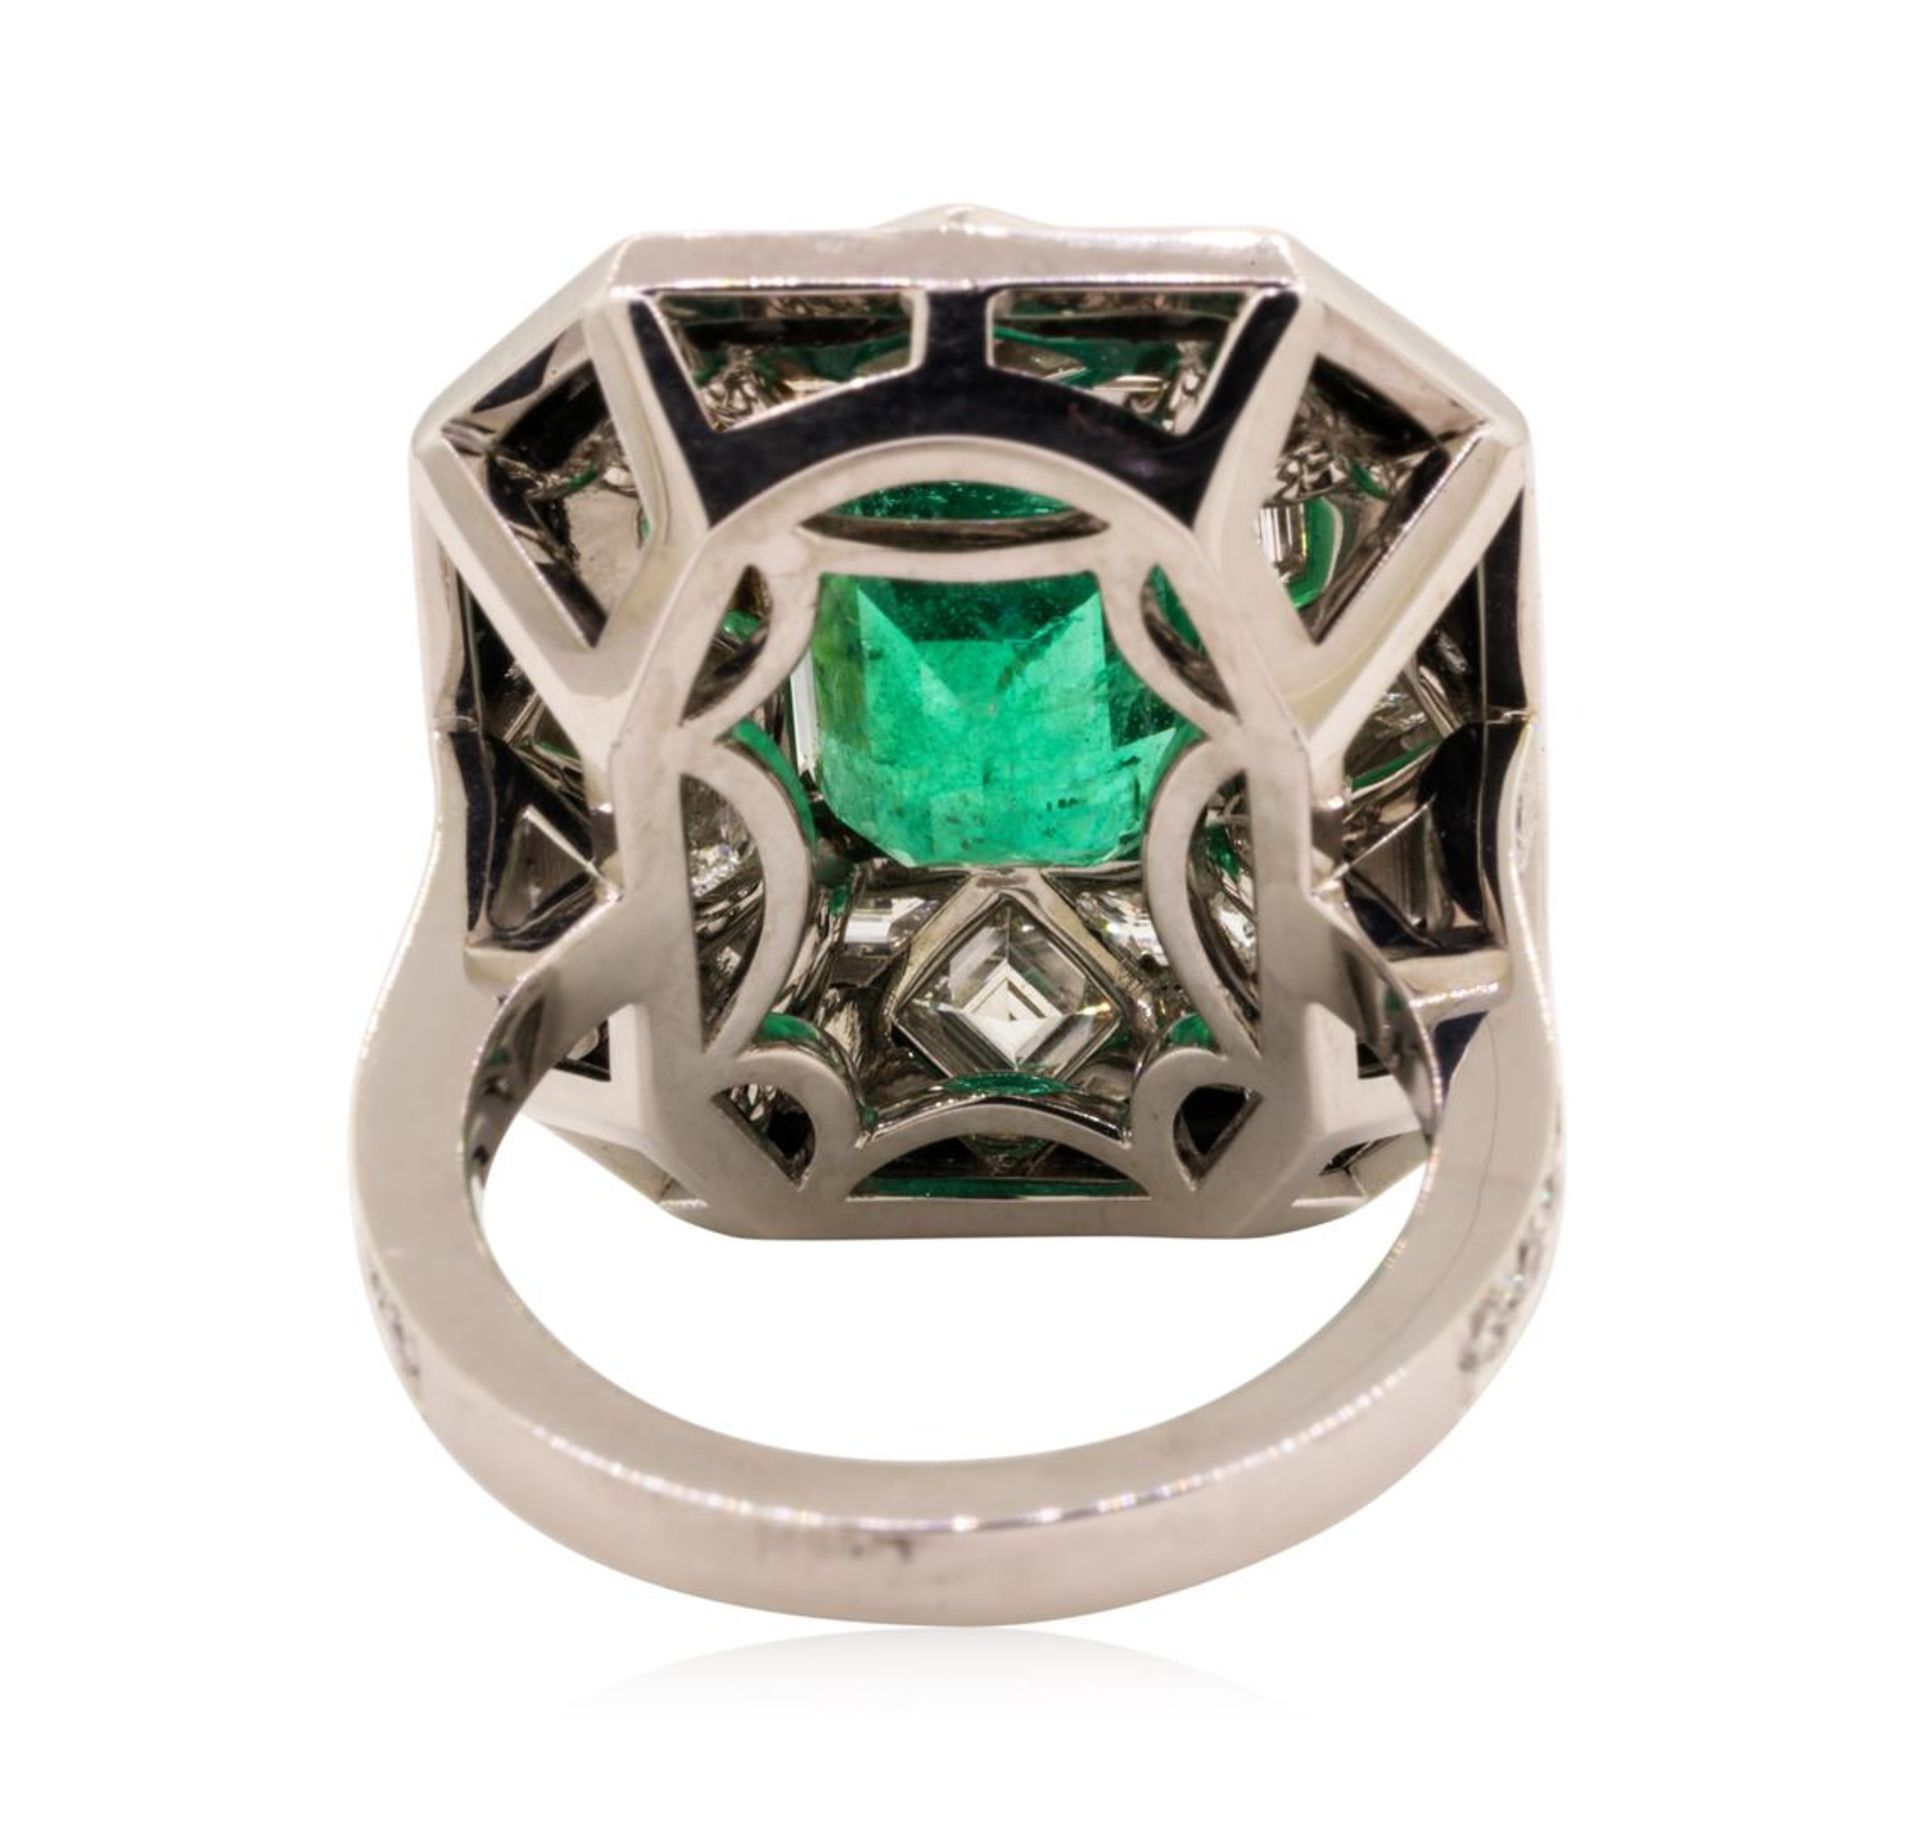 6.46 ctw Emerald and Diamond Ring - 18KT White Gold - Image 3 of 6